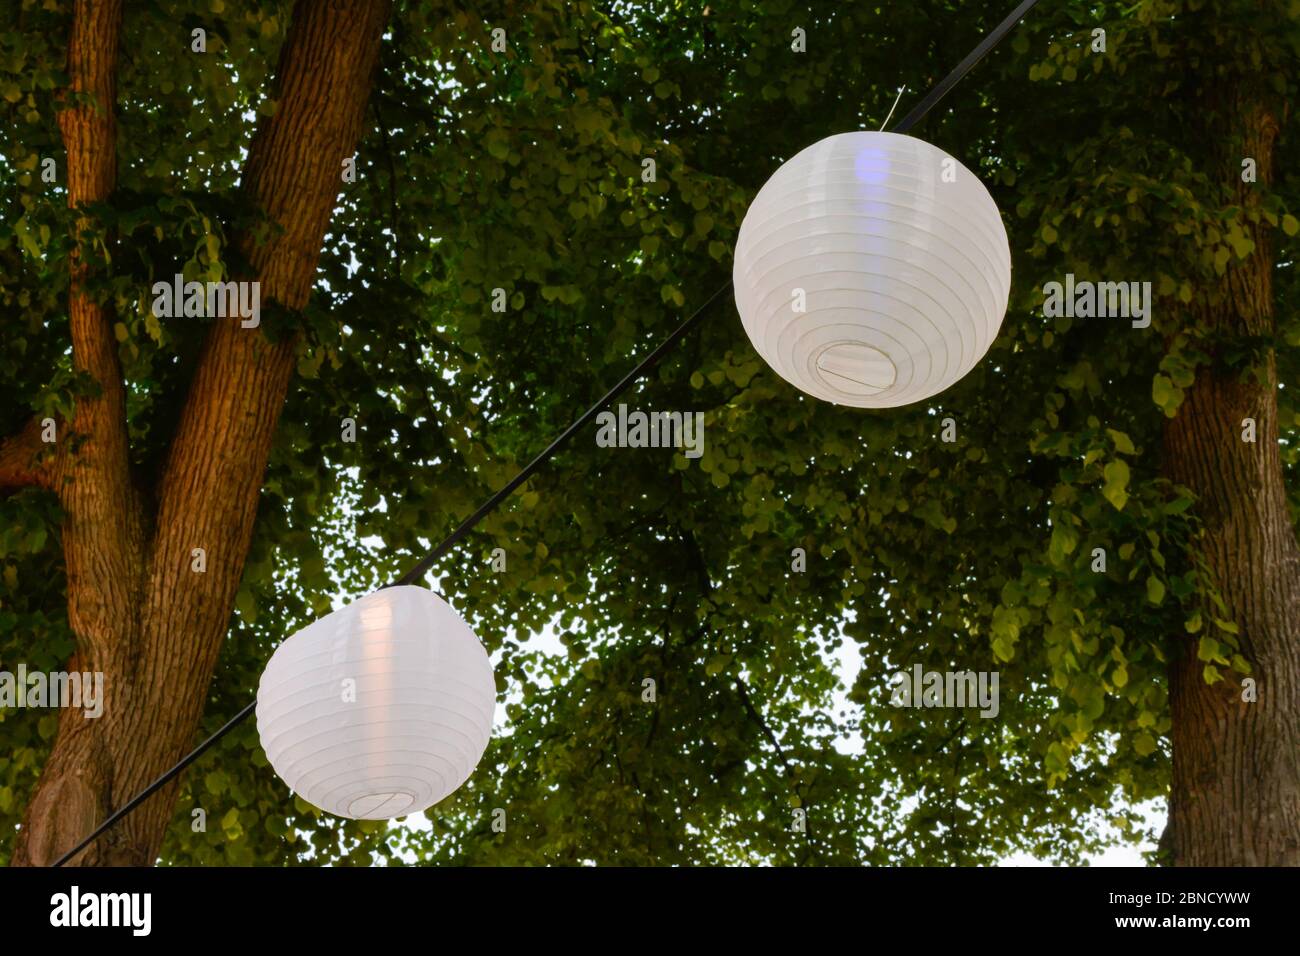 White paper lanterns lamps illuminated hanging outside in trees at a  festival party Stock Photo - Alamy